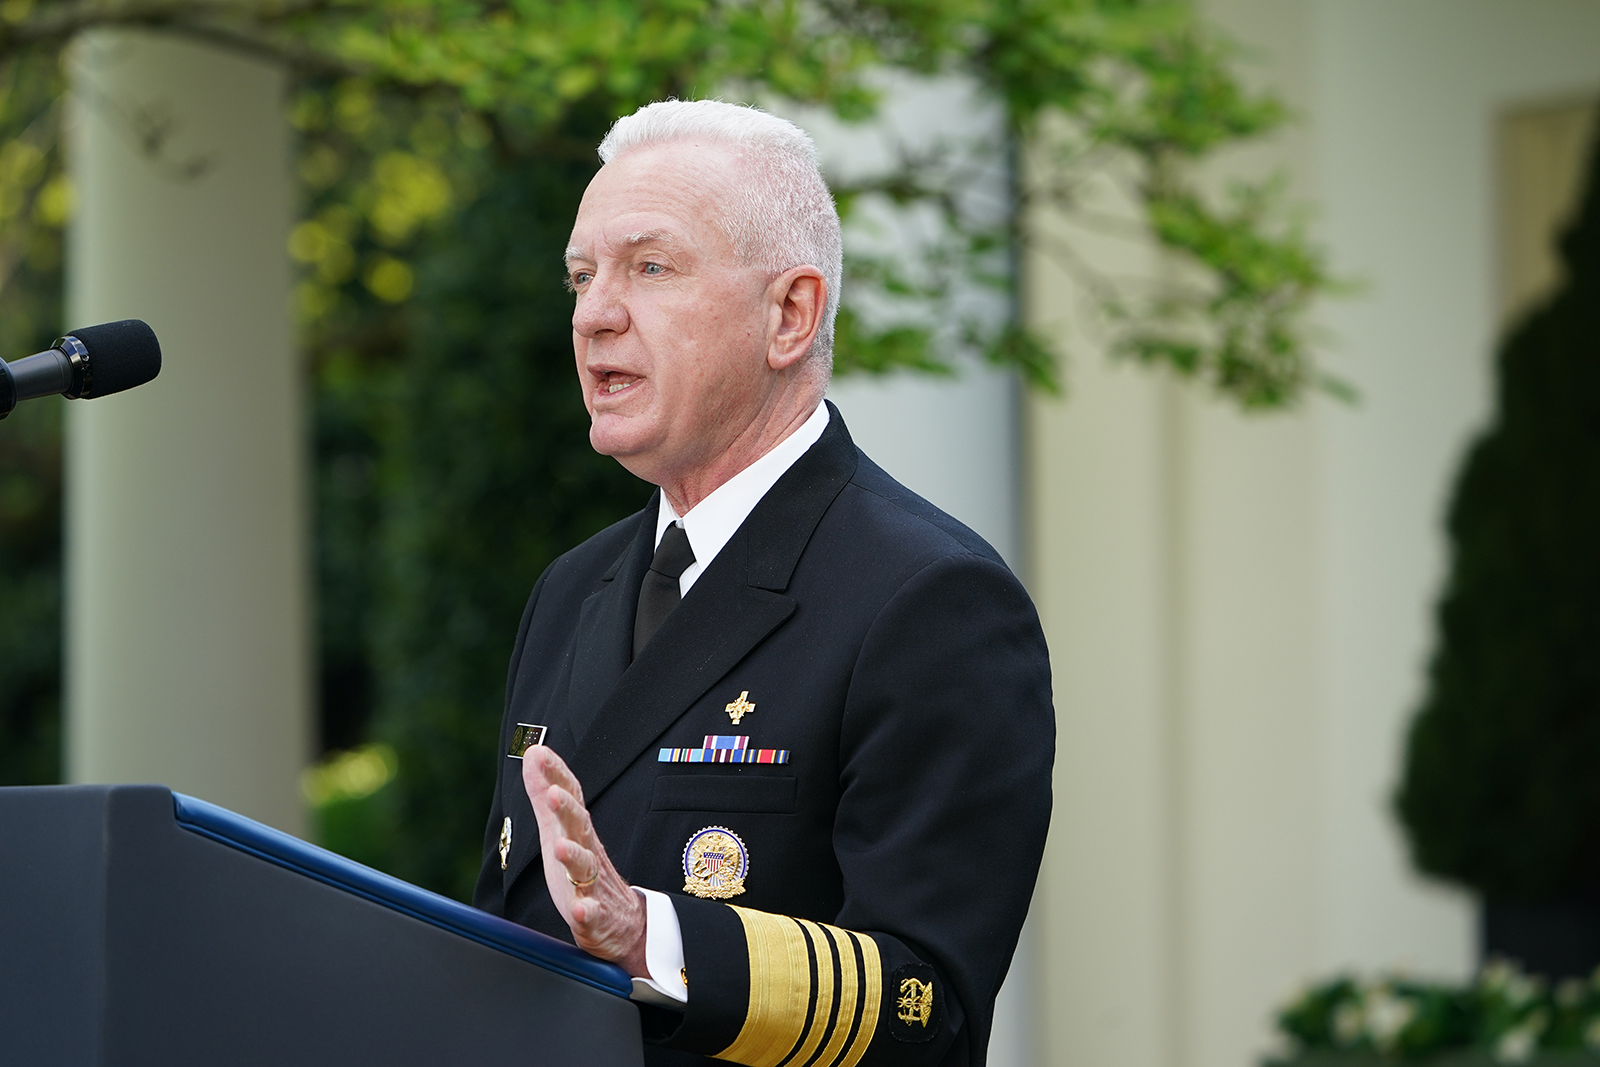 Assistant Secretary for Health admiral Brett Giroir speaks during a news conference on Covid-19, in the Rose Garden of the White House in Washington, DC on April 27.